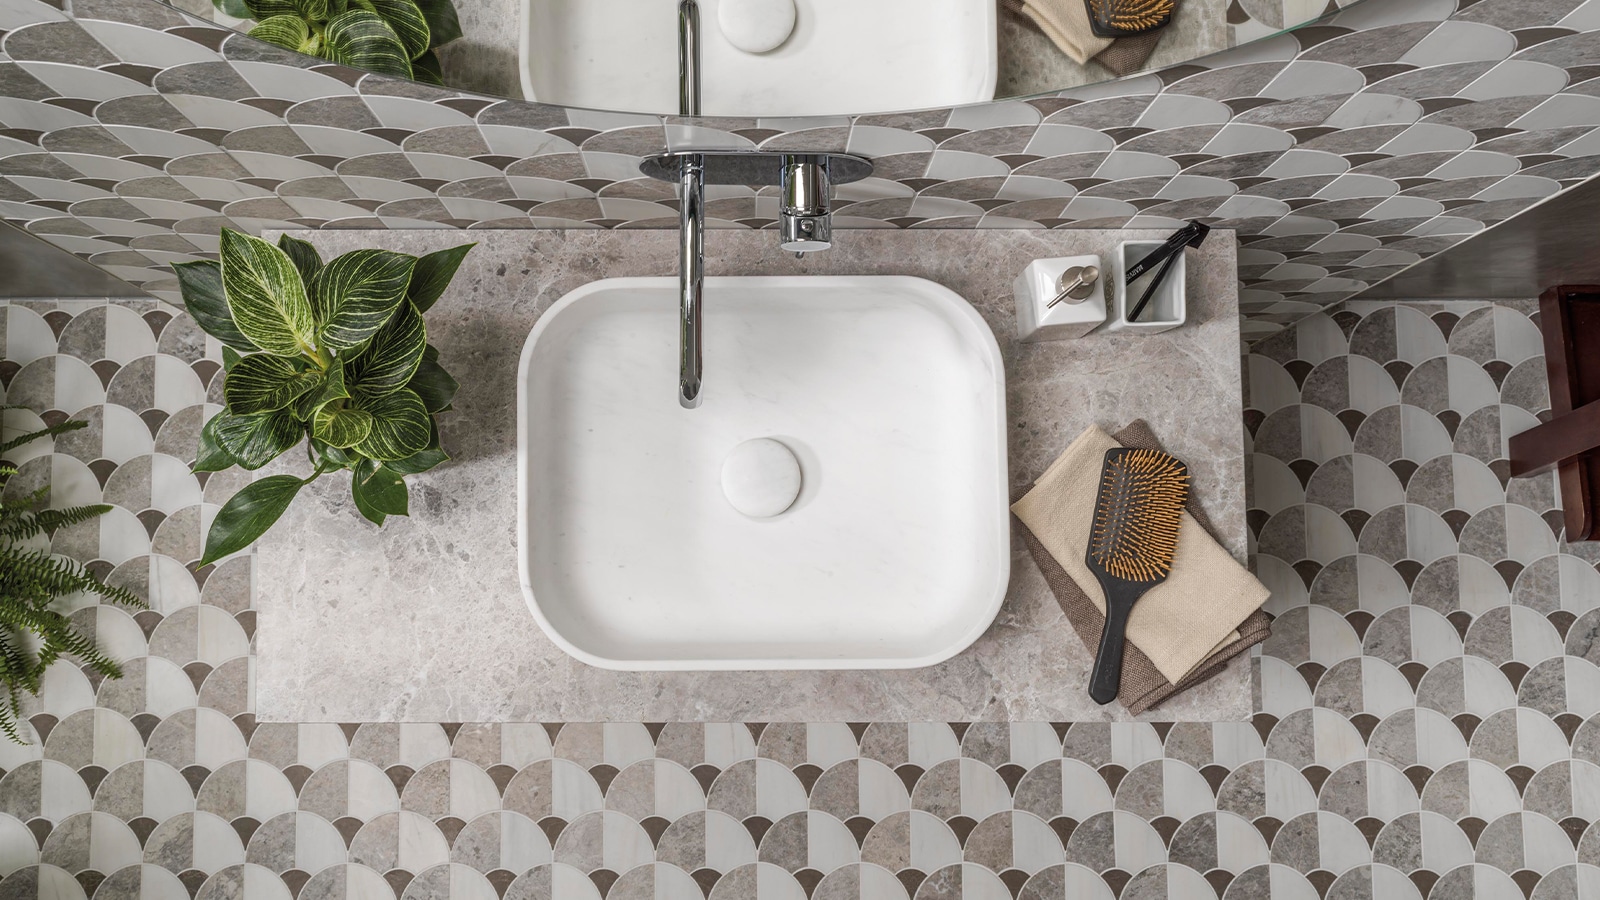 Natural wall tiles and home accessories are what's new from L'Antic Colonial at Cersaie